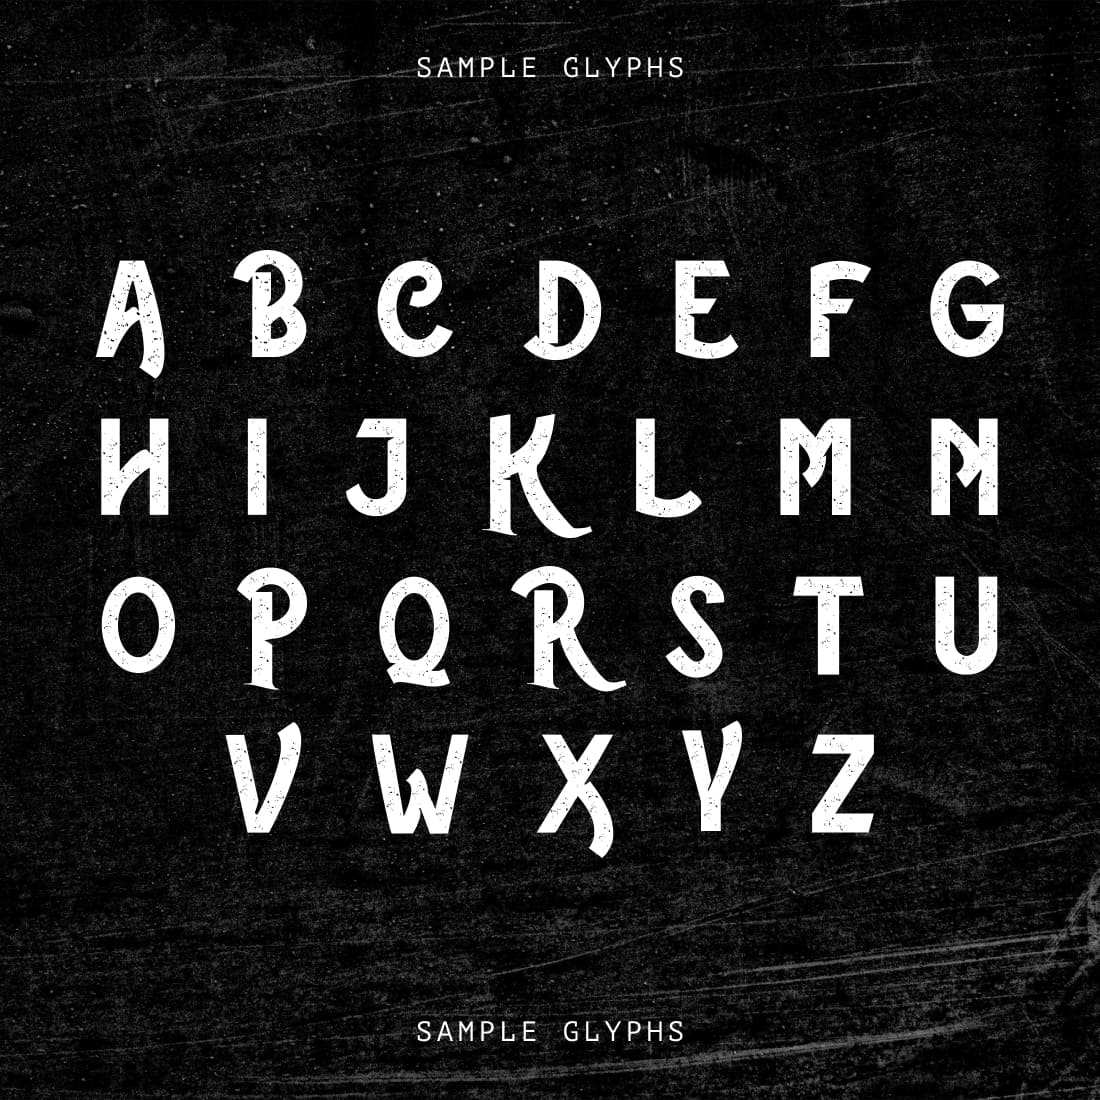 The rustic free font sample glyphs.